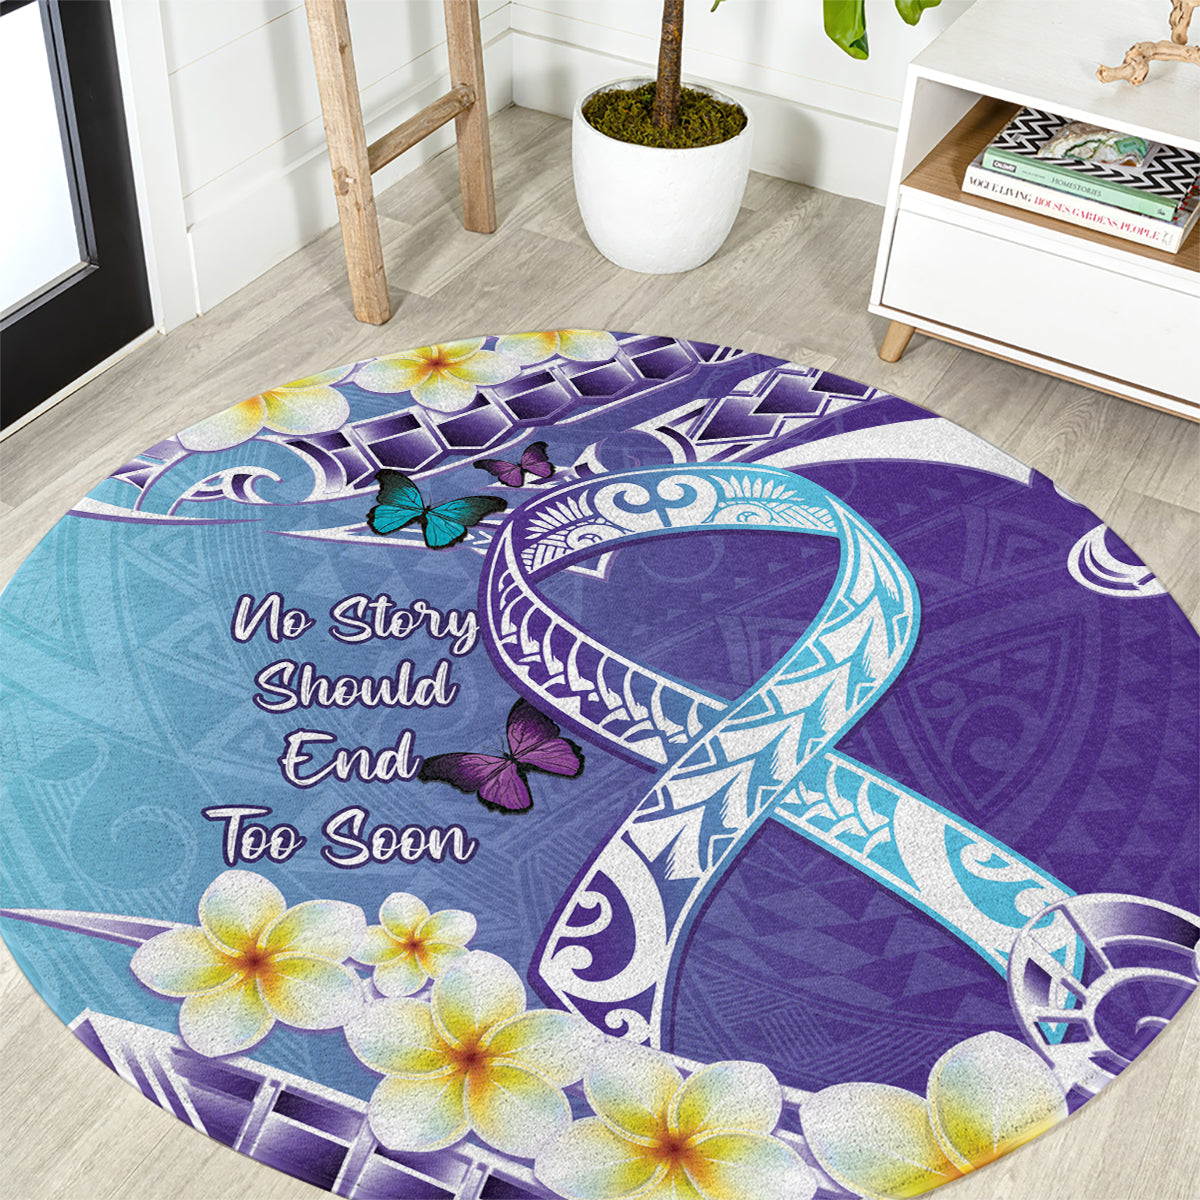 No Story Should End Too Soon Suicide Awareness Round Carpet Purple And Teal Polynesian Ribbon